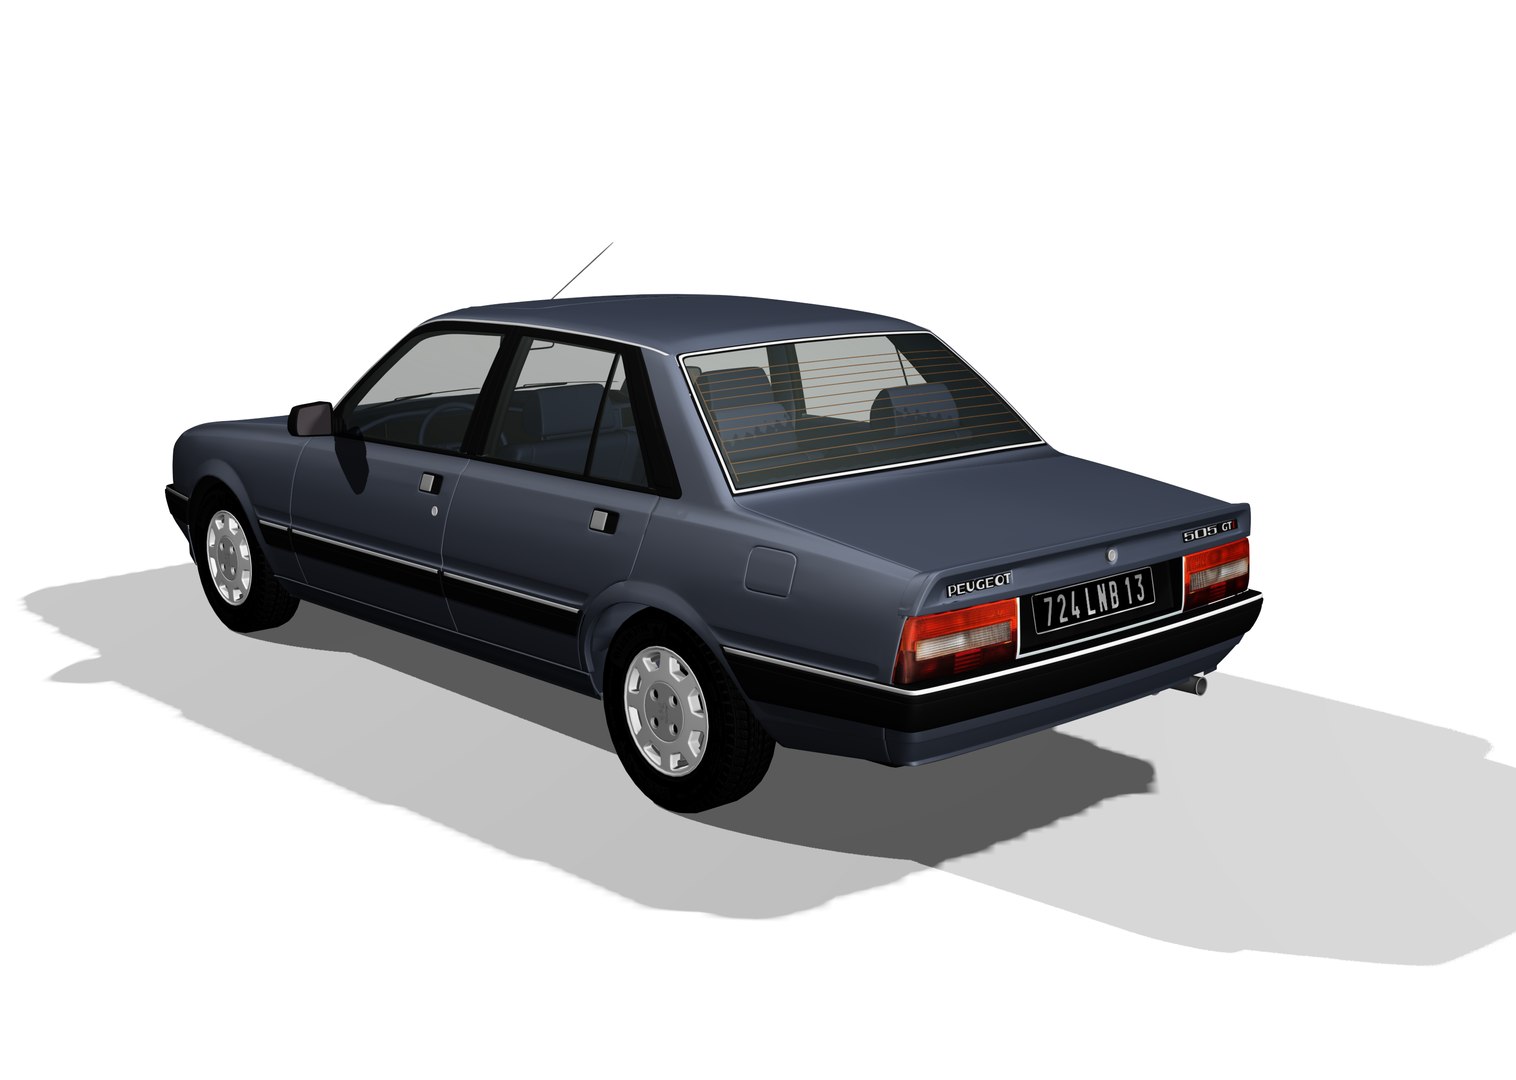 The Peugeot 505 Built for French Colonies (and American